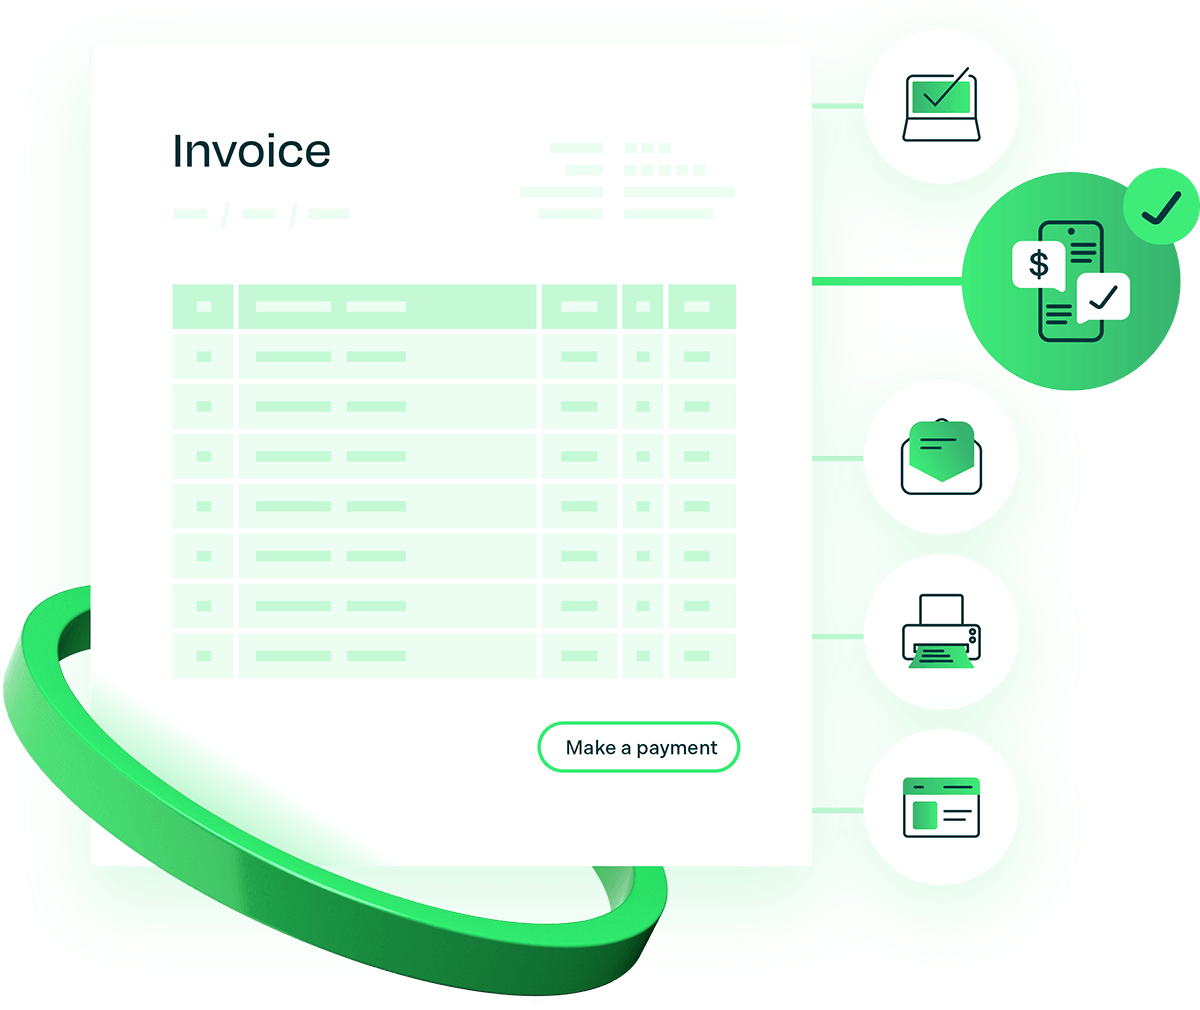 Graphic showing an invoice being delivered by one of multiple methods